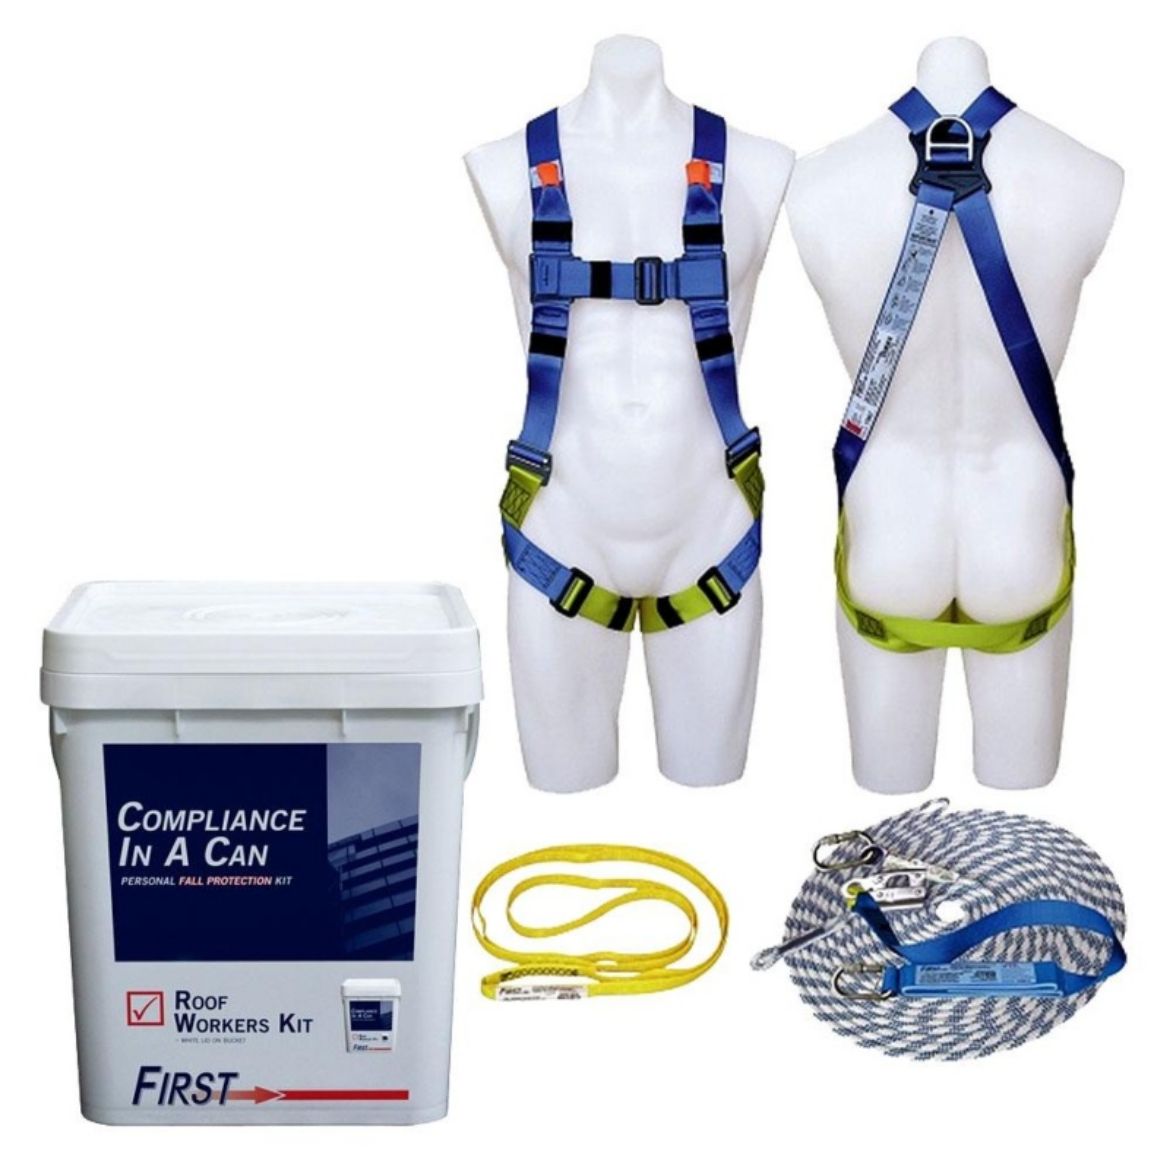 Picture of AA1000AU P50 FALL PROTECTION KIT FIRST ROOF WORKERS KIT